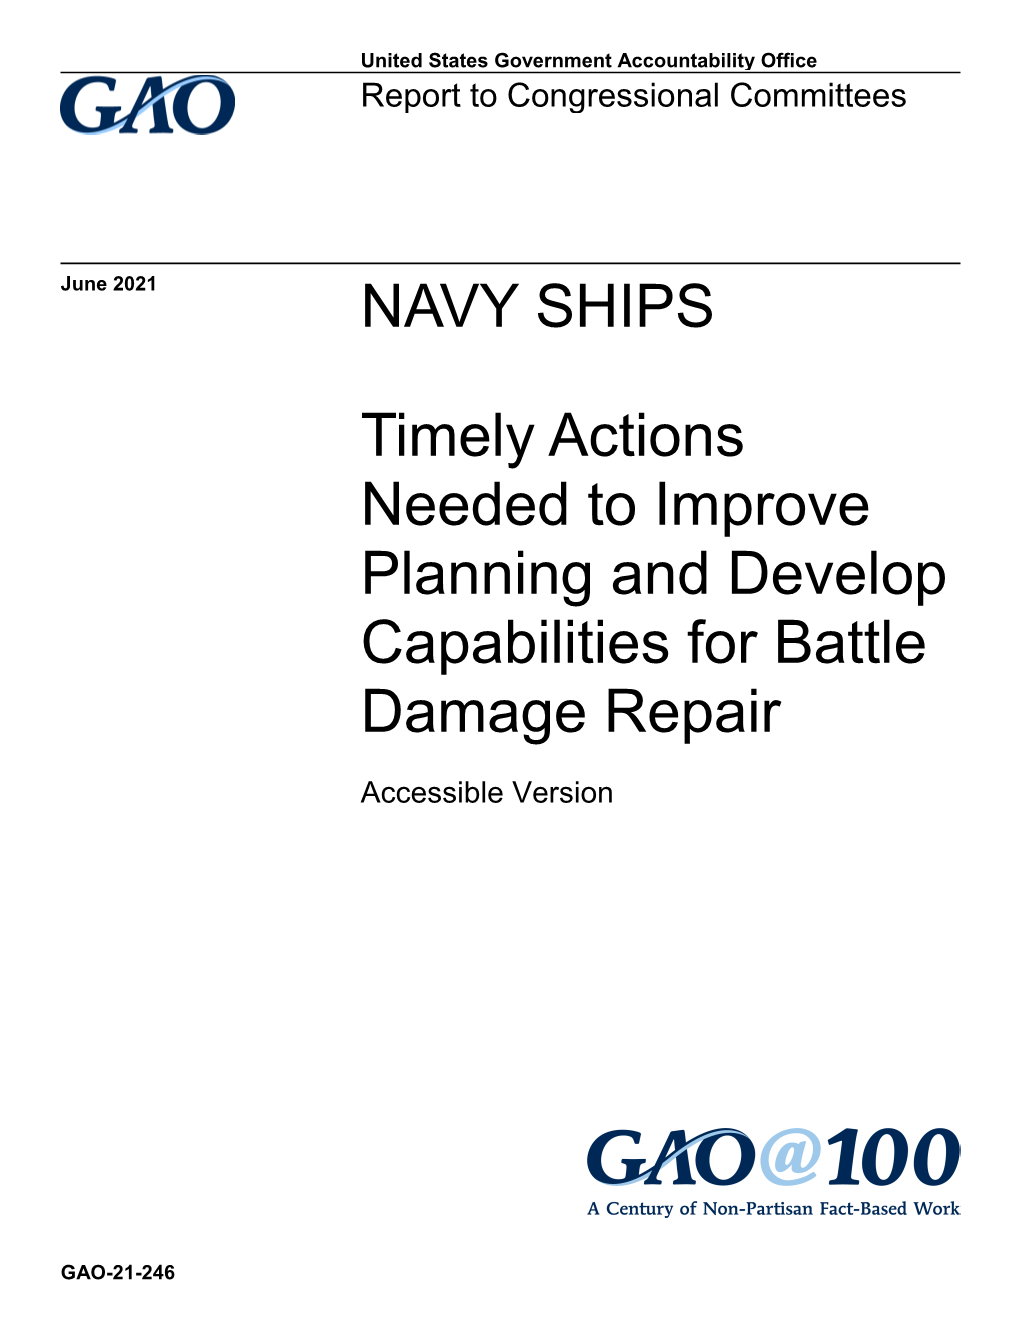 GAO-21-246, Accessible Version, NAVY Ships: Timely Actions Needed to Improve Planning and Develop Capabilities for Battle Damage